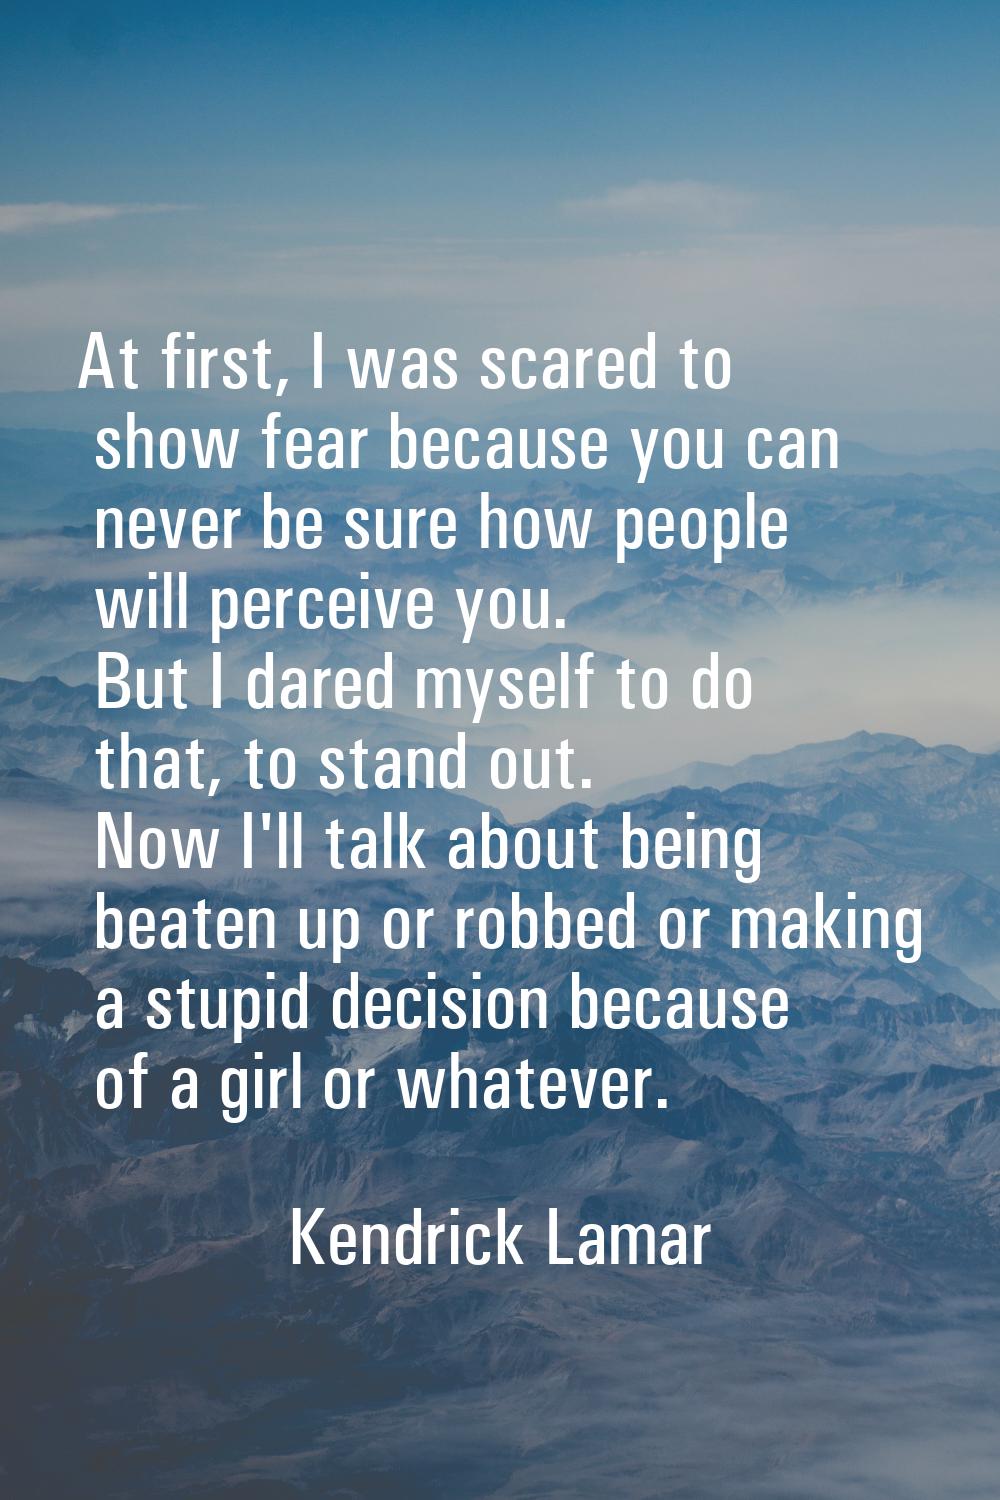 At first, I was scared to show fear because you can never be sure how people will perceive you. But